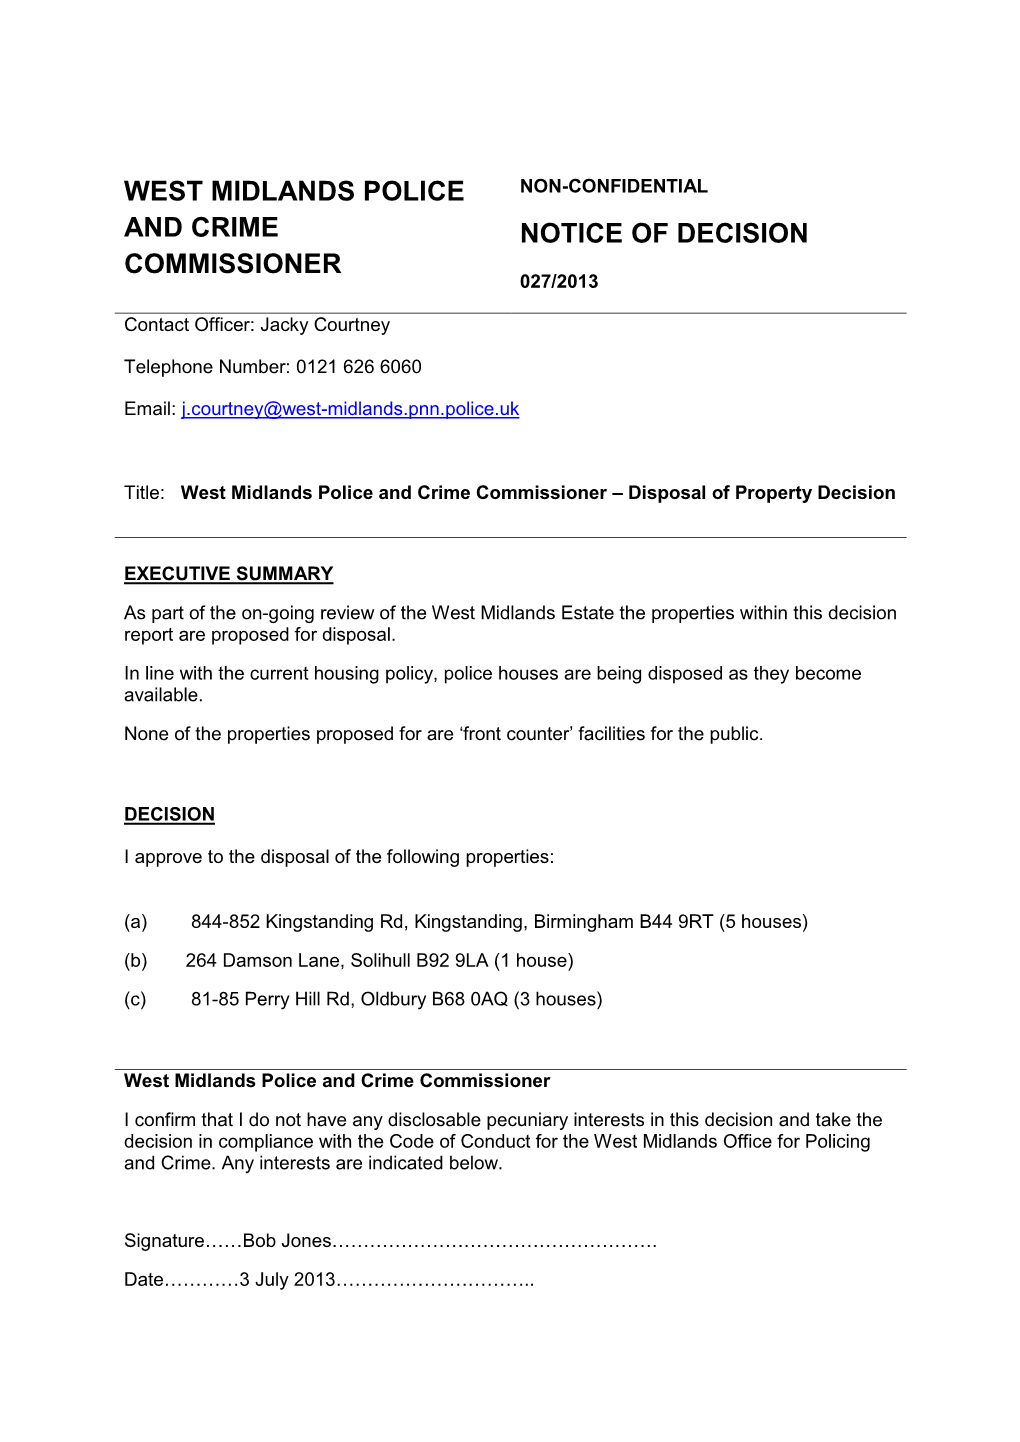 West Midlands Police and Crime Commissioner Notice of Decision